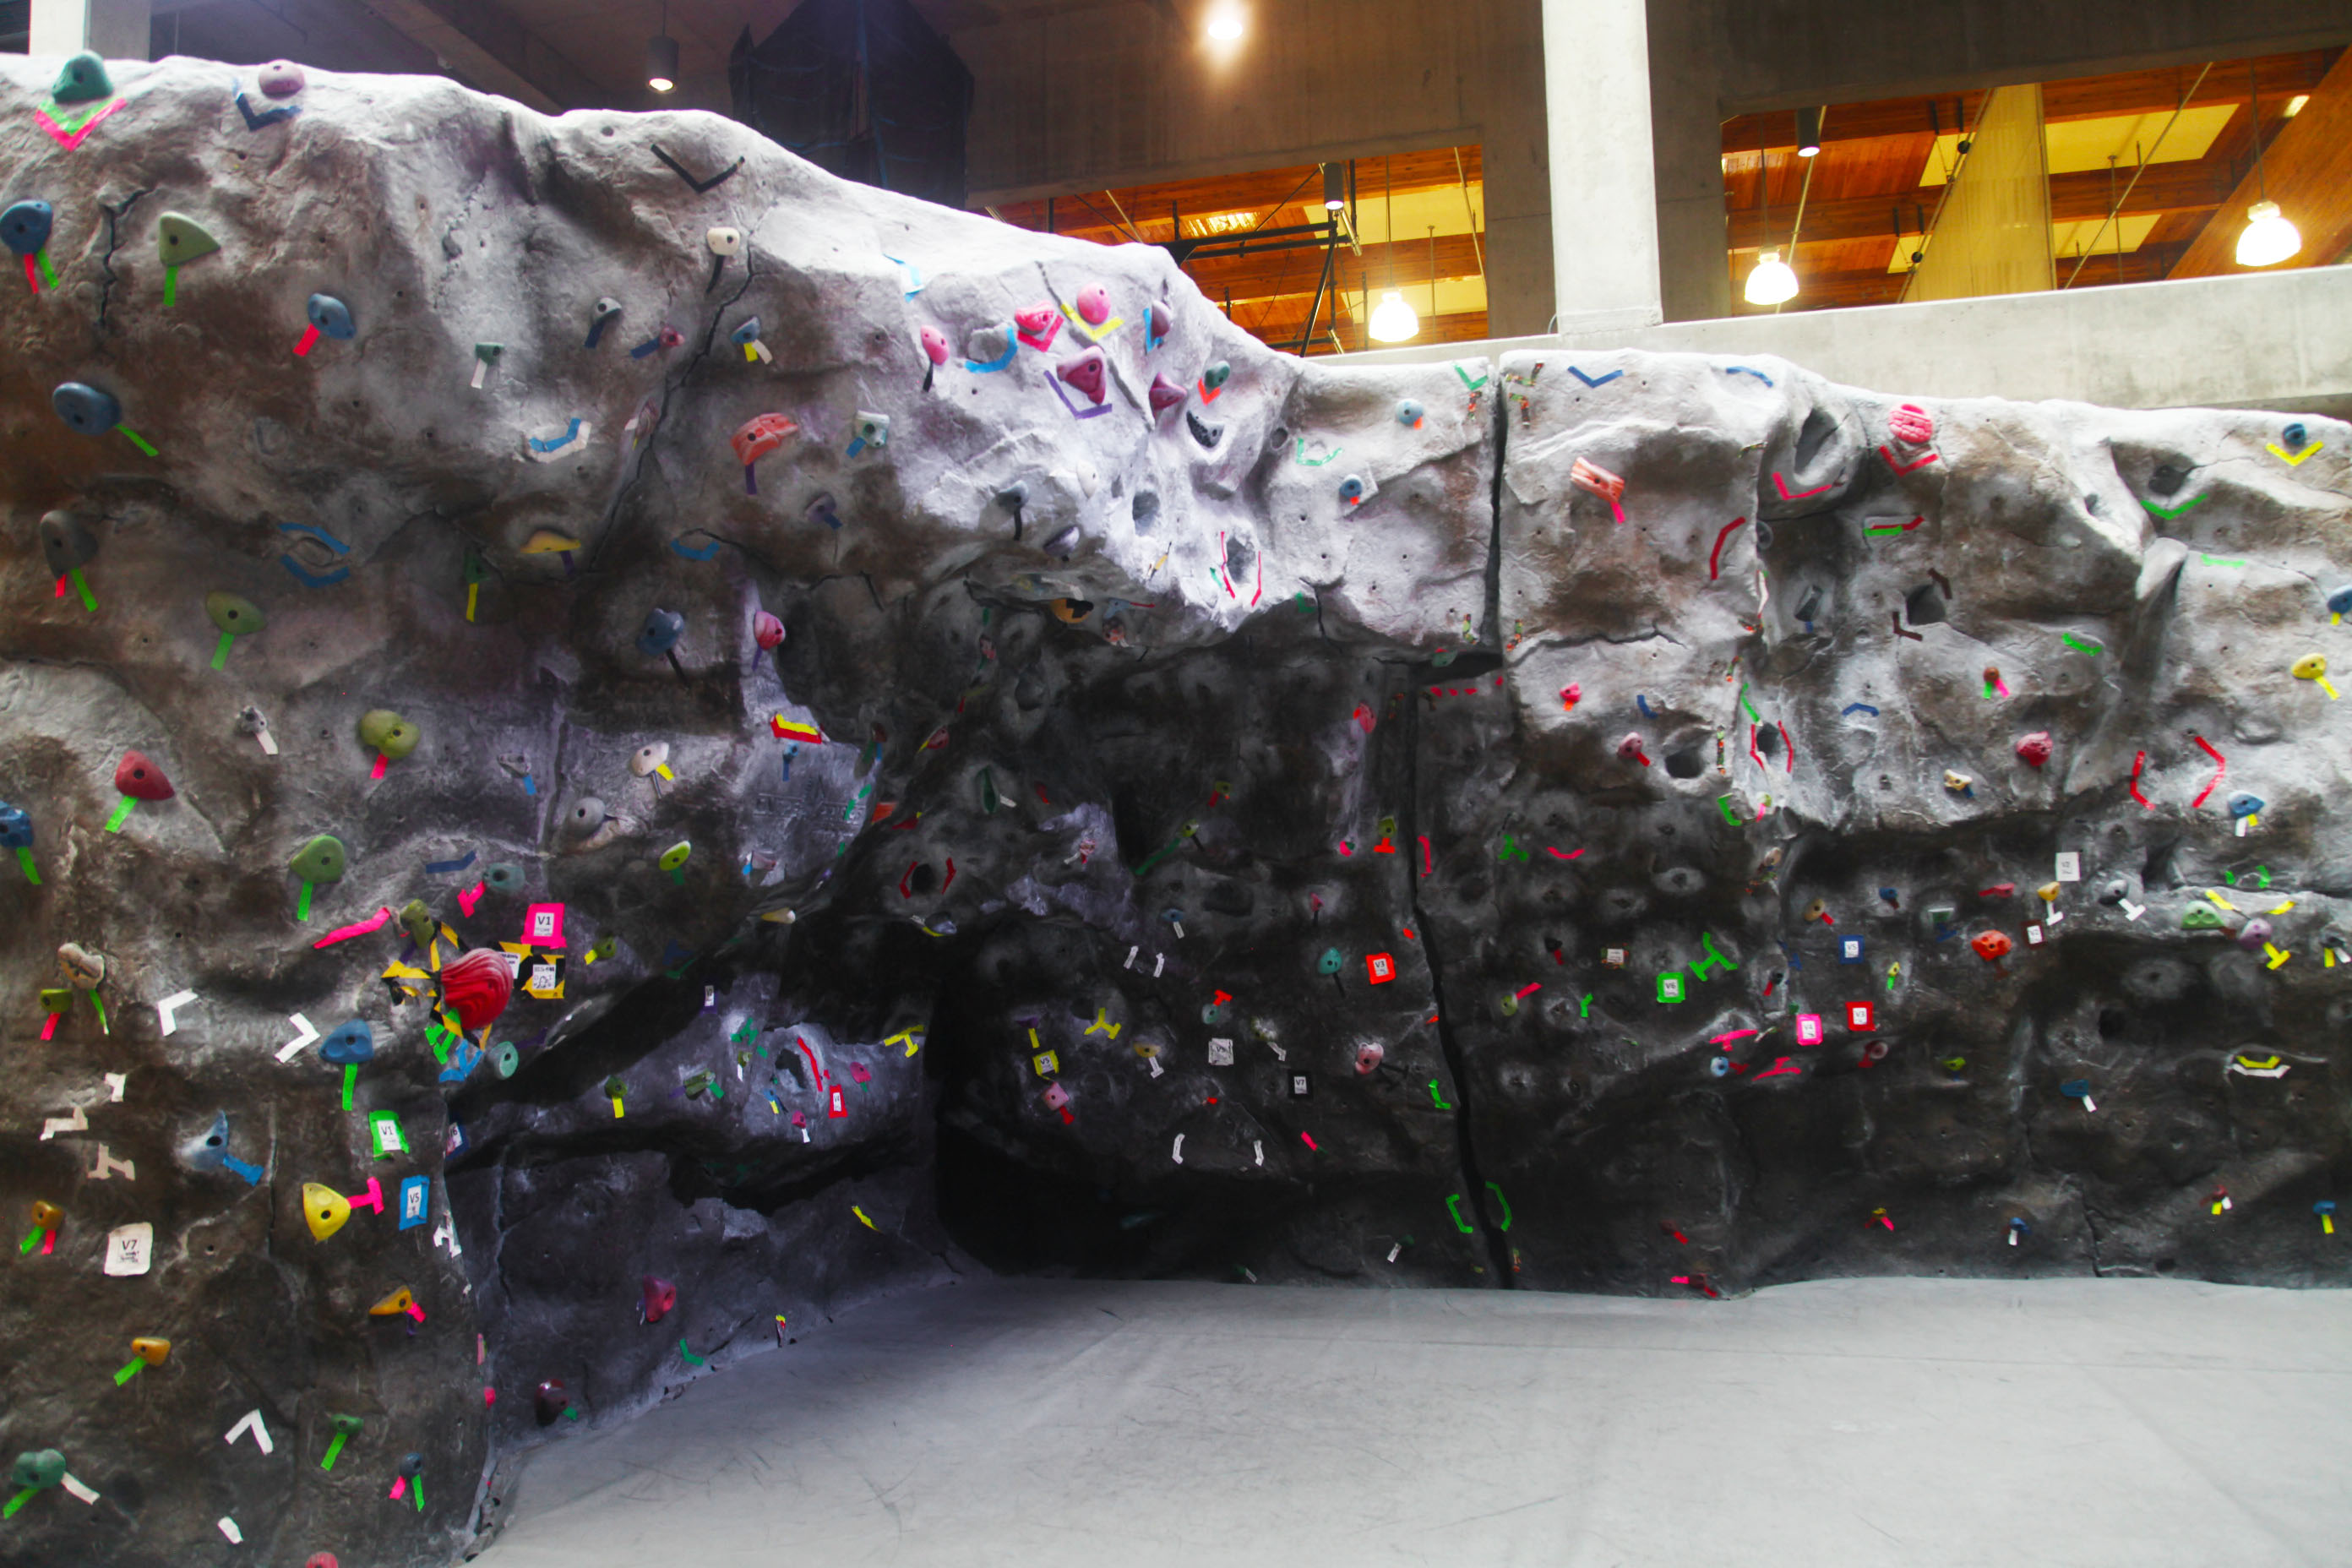 WWU's colorful rock climbing wall with various rocks of different sizes and shapes.